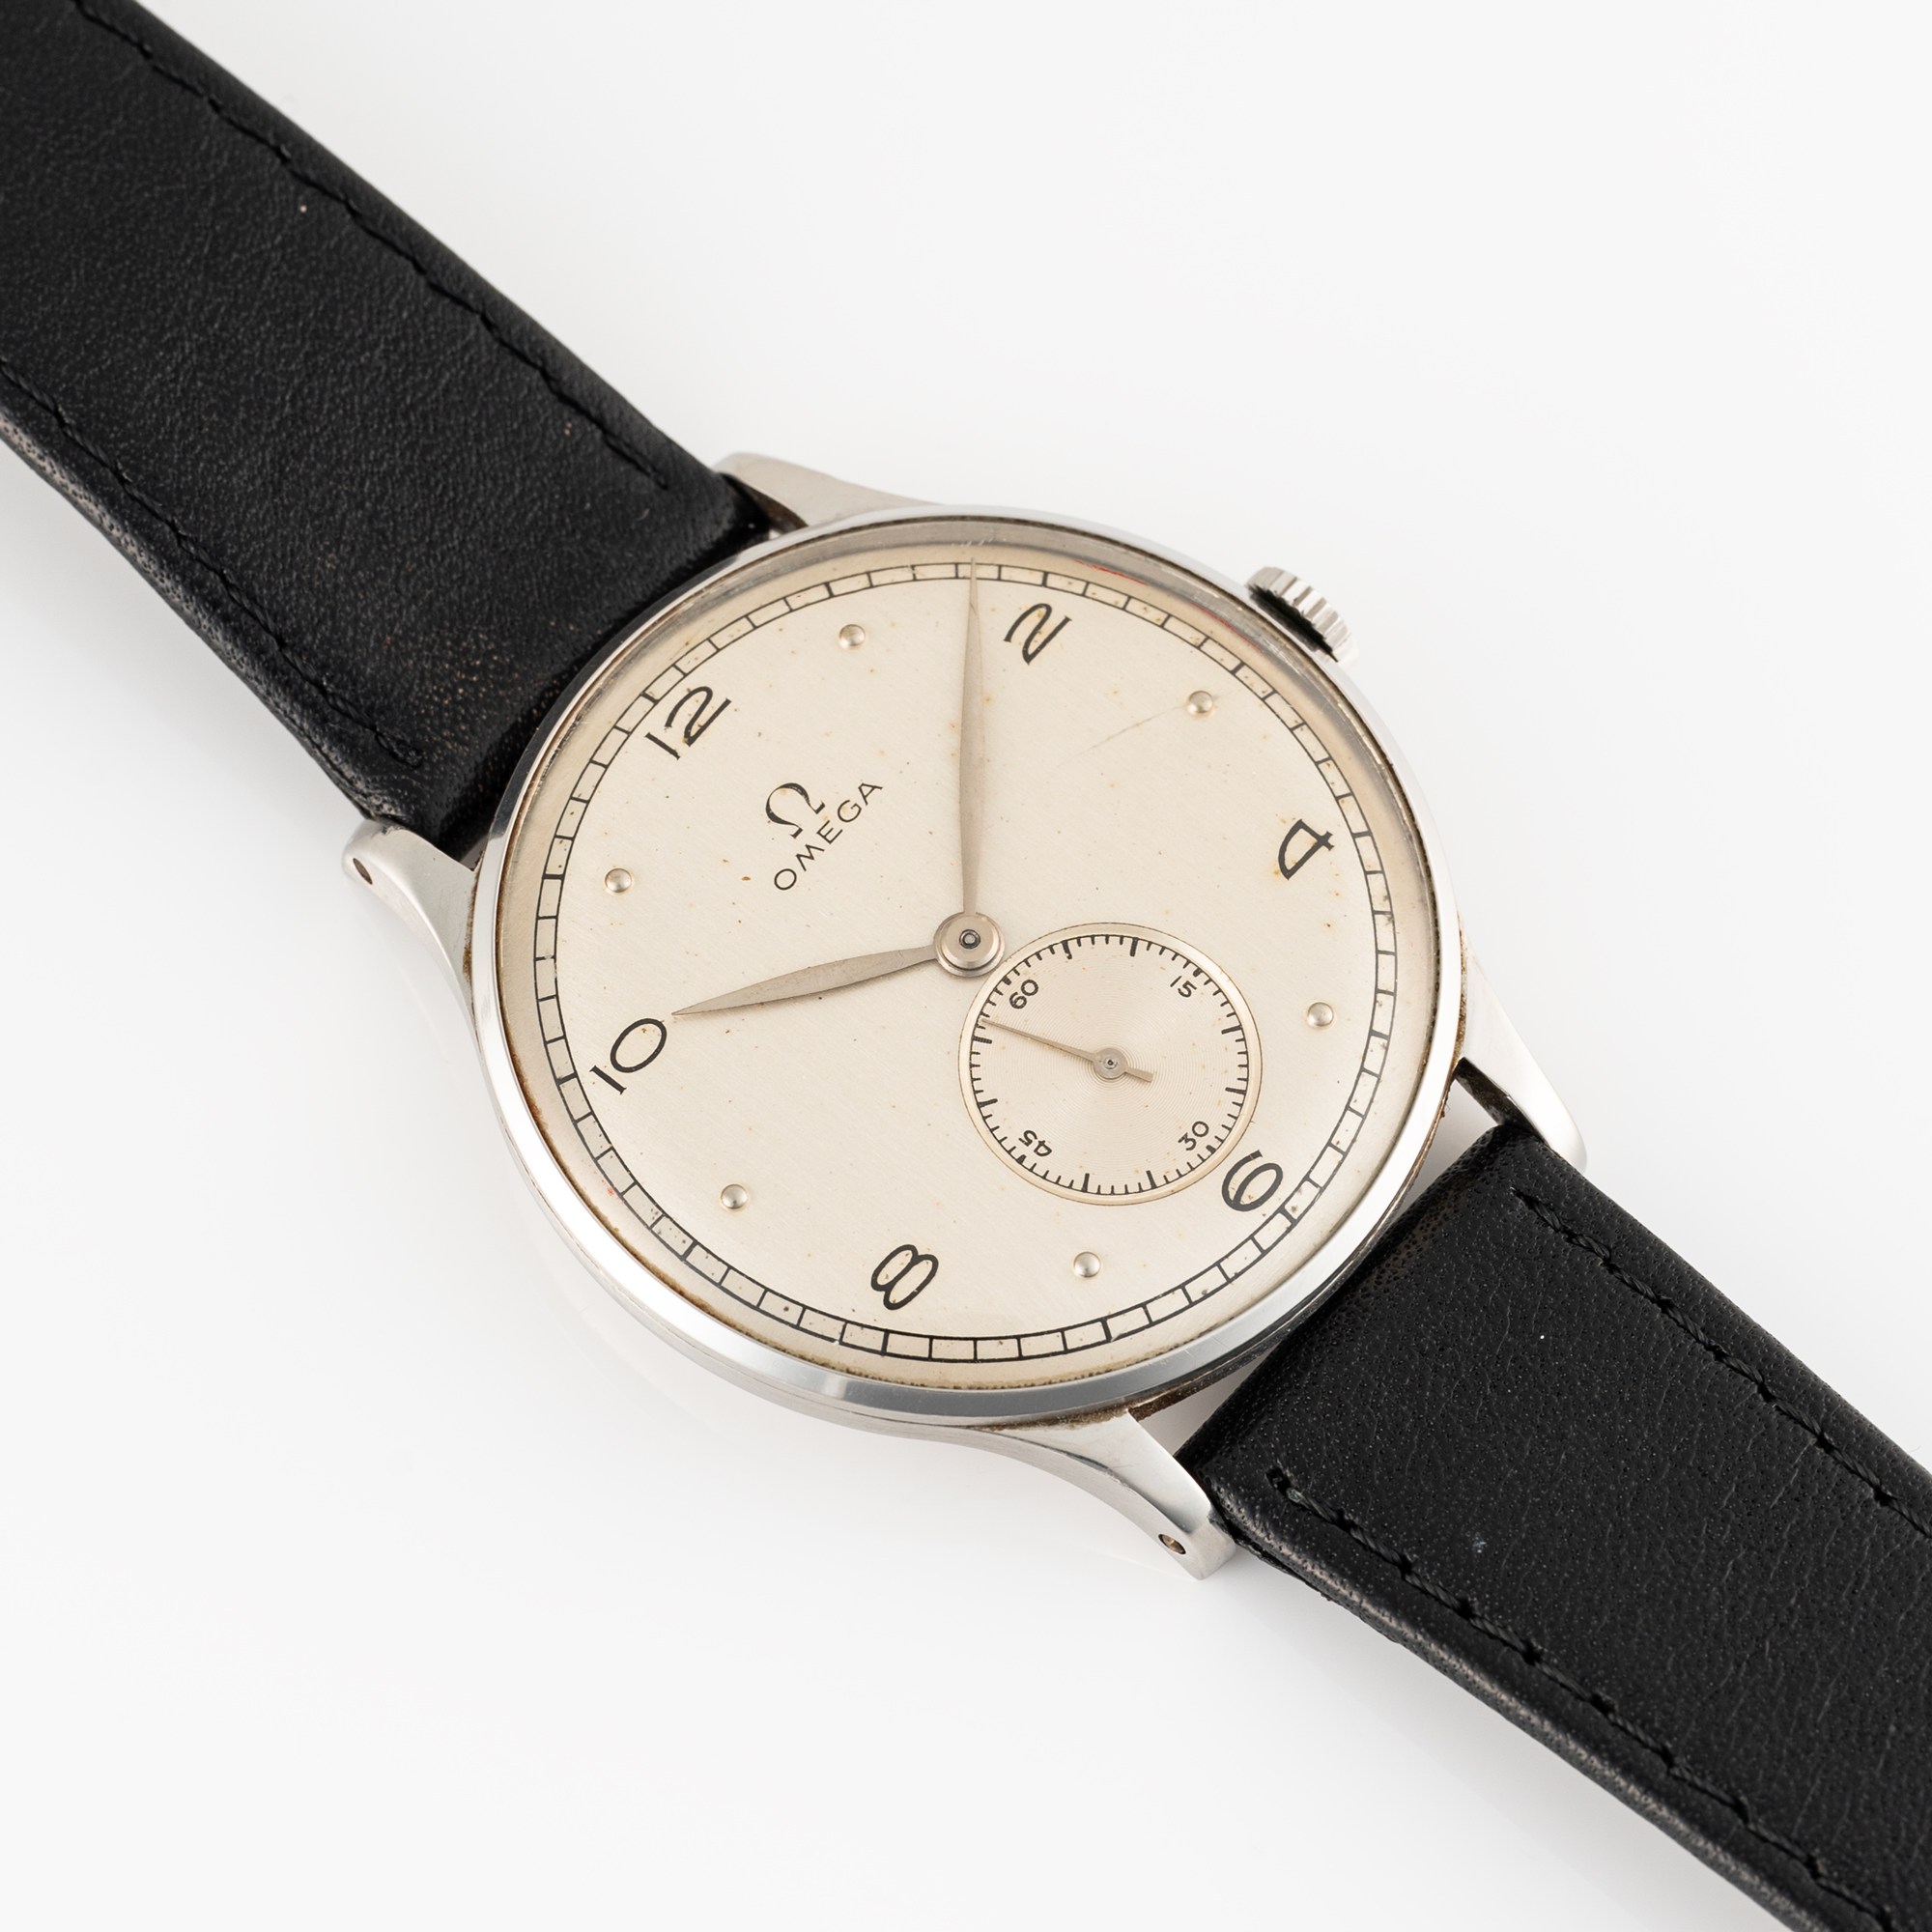 A GENTLEMAN'S SIZE STAINLESS STEEL OMEGA WRIST WATCH CIRCA 1940s, REF. 2340/1 Movement: 15J, - Image 3 of 8